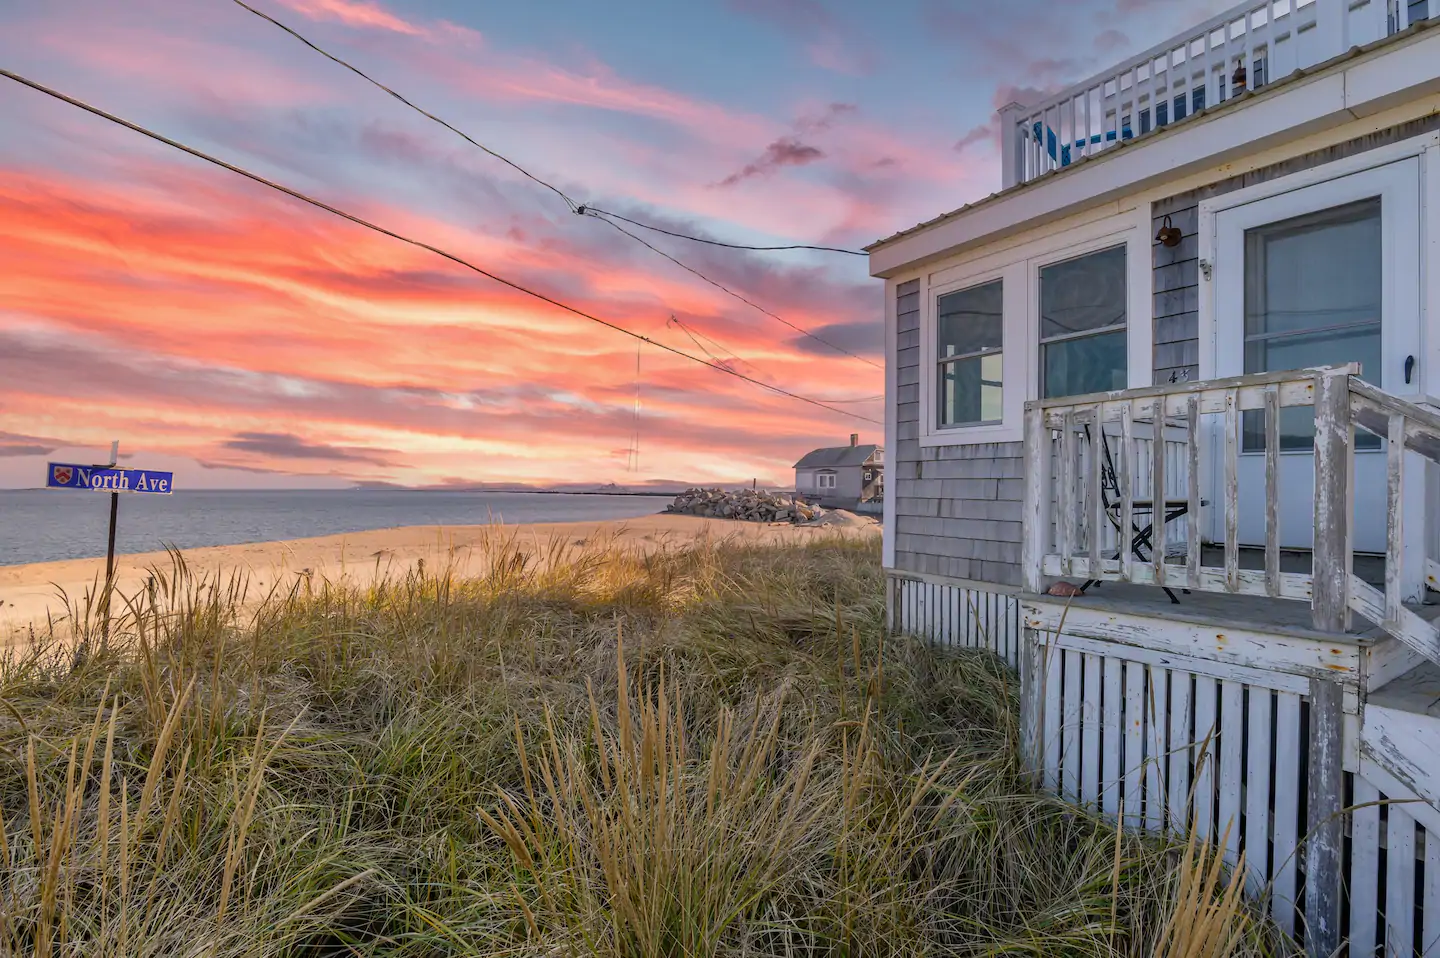 This rustic seaside cottage is situated in a breathtaking setting.